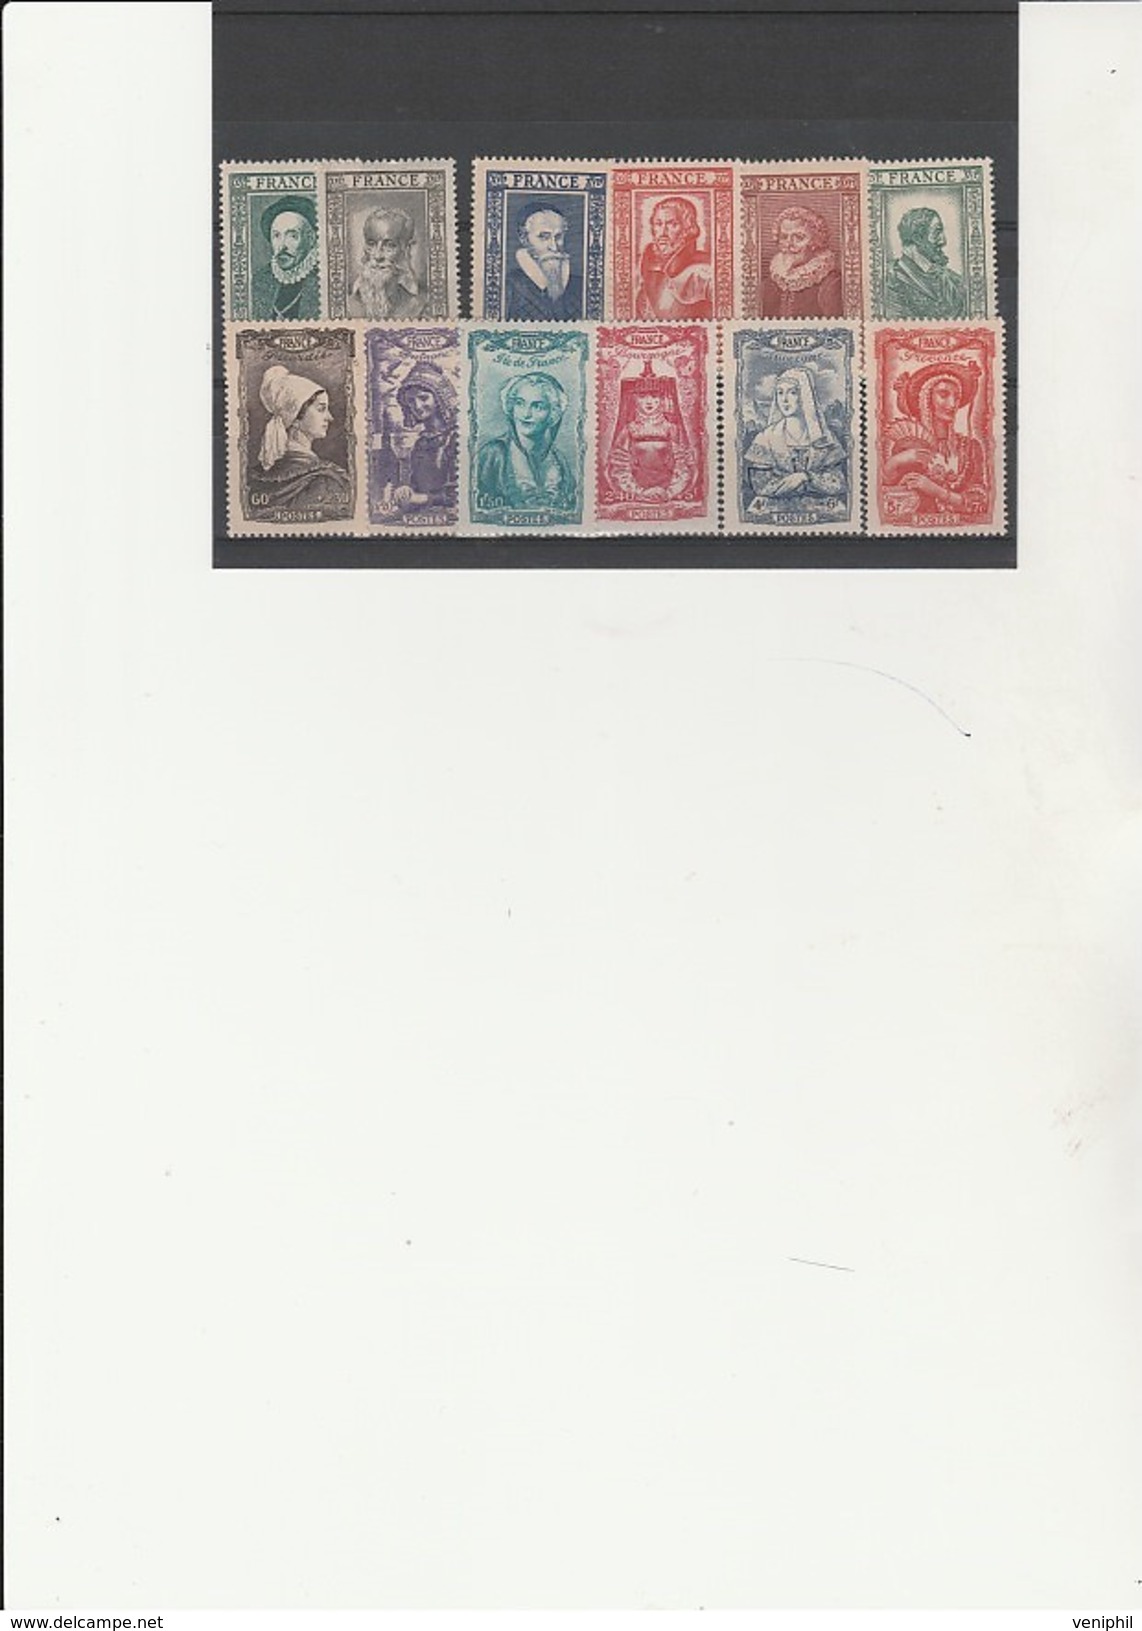 TIMBRES  CELEBRITES N° 587 A 598  NEUF SANS CHARNIERE - COTE : 32 €- ANNEE 1943 - Nuovi